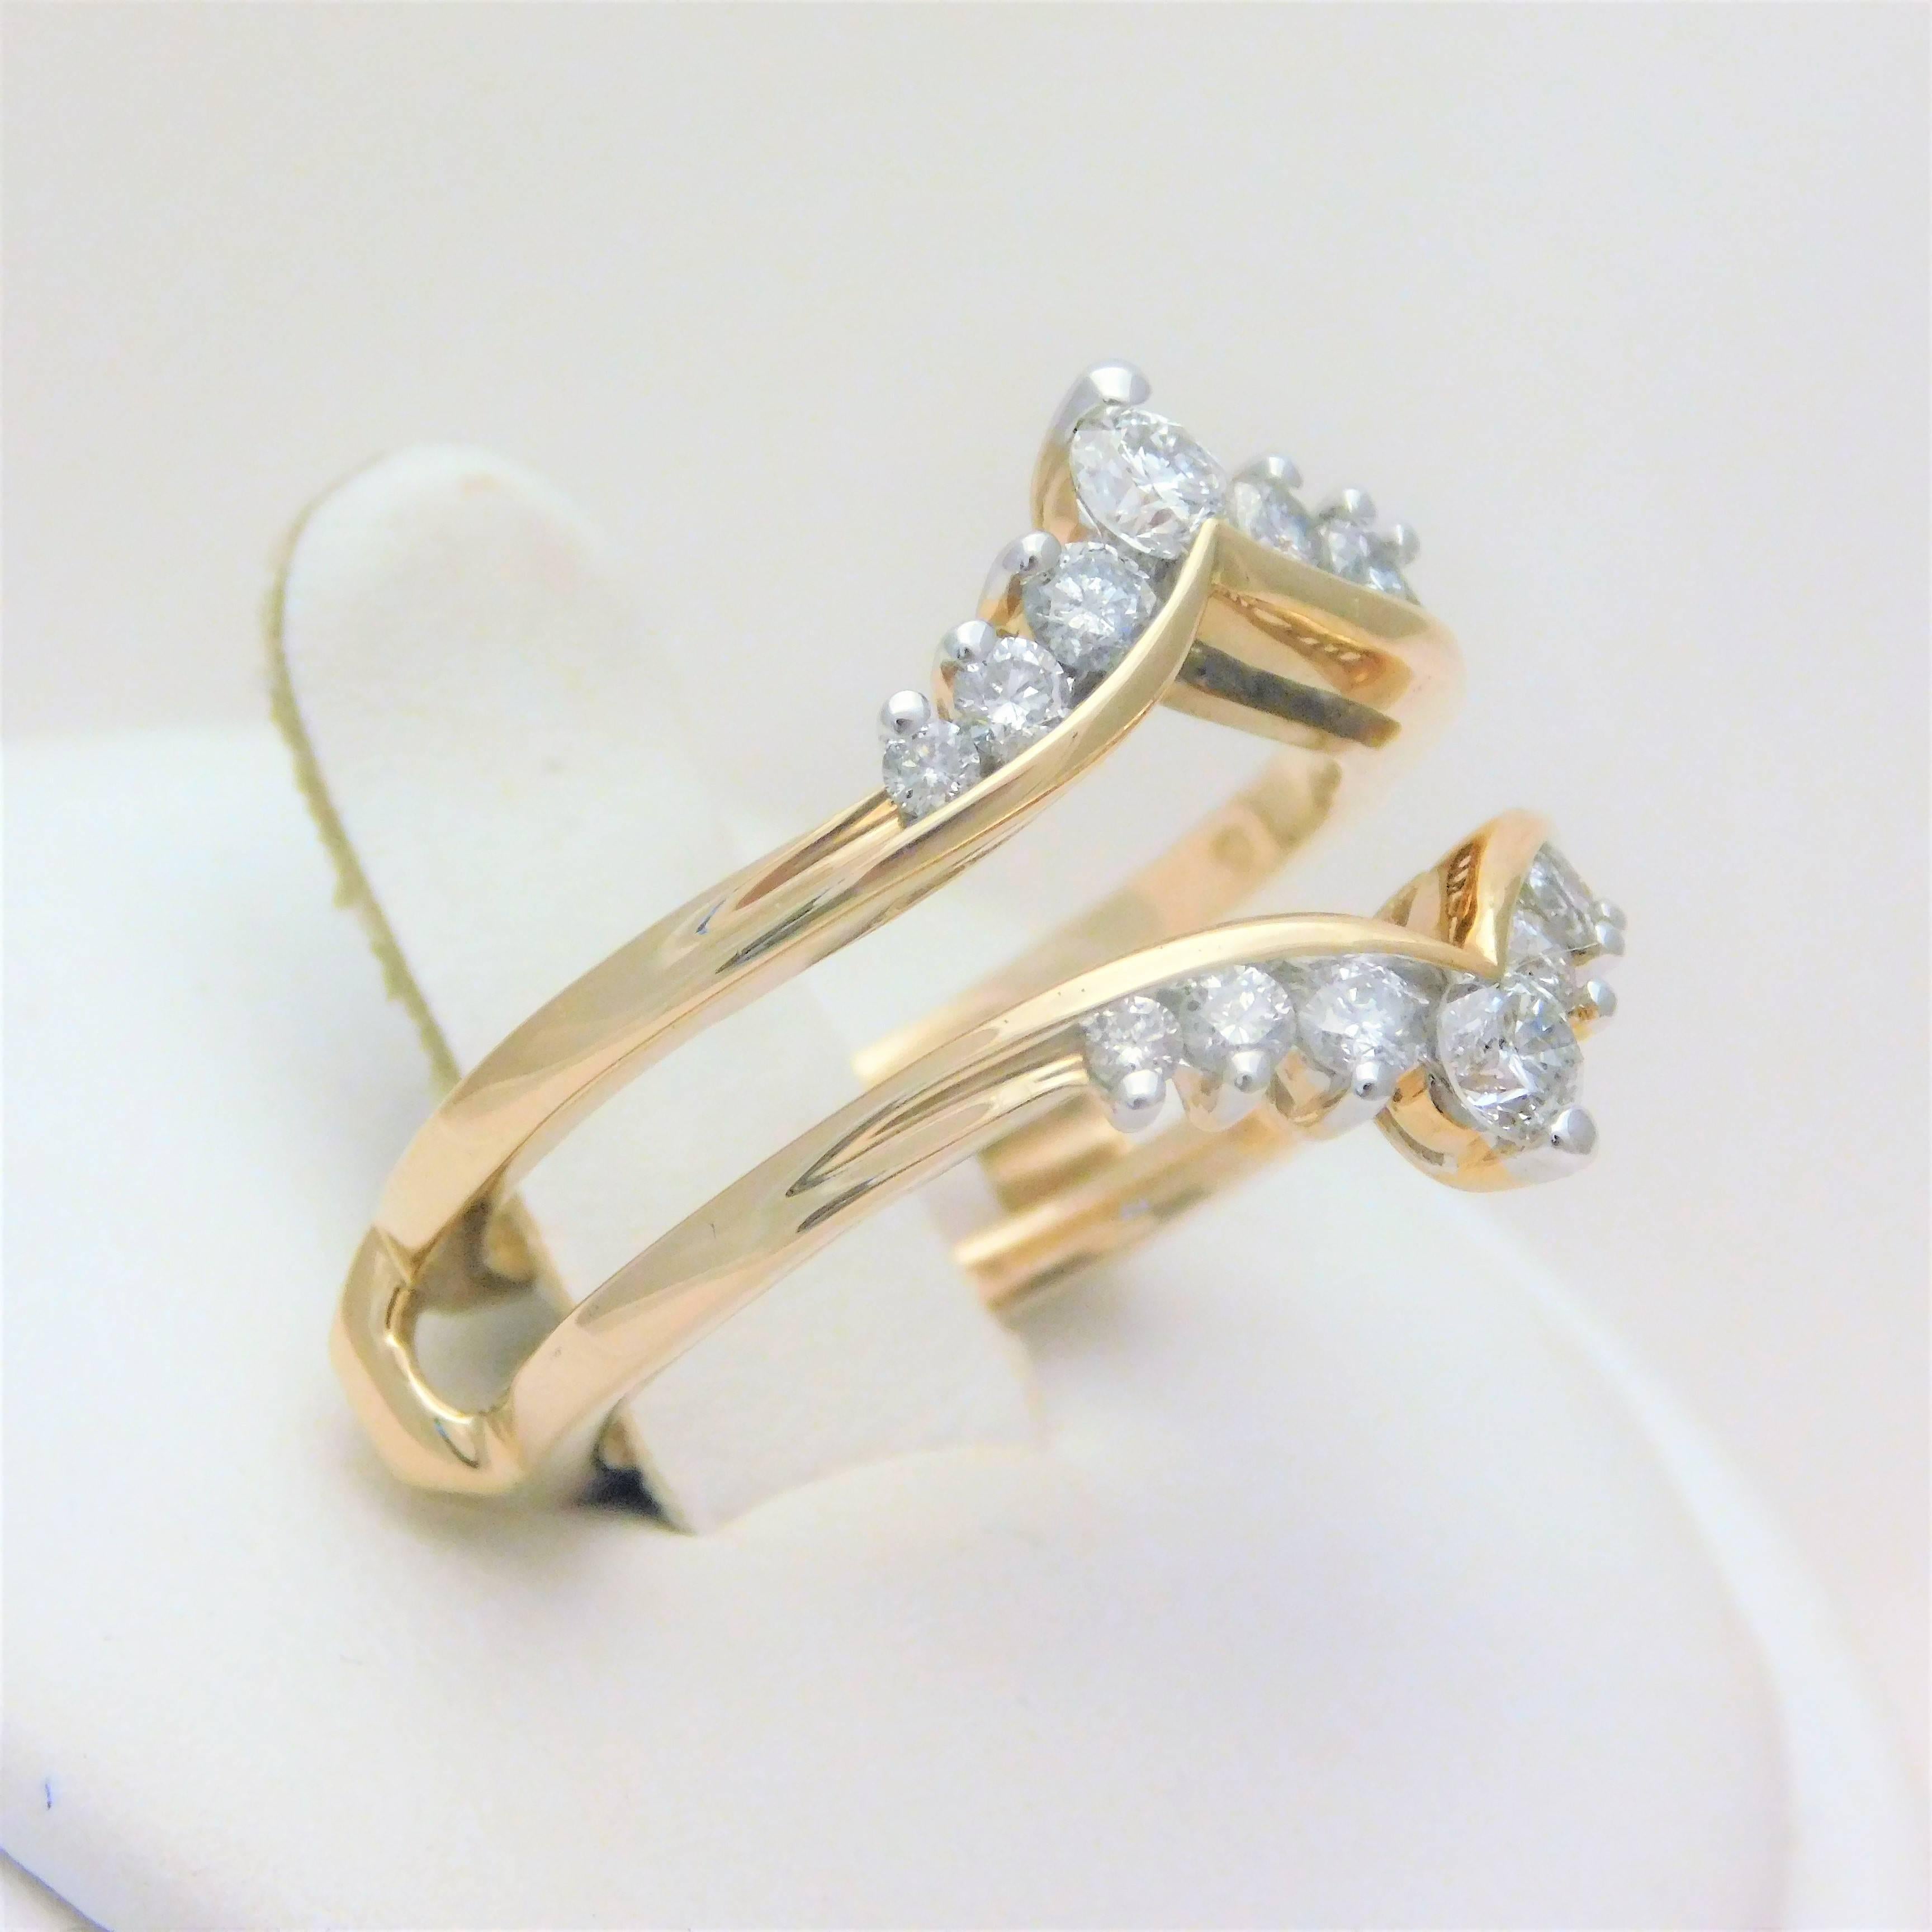 Vintage 14 Karat Diamond Engagement Ring Wrap Enhancer In New Condition For Sale In Metairie, LA